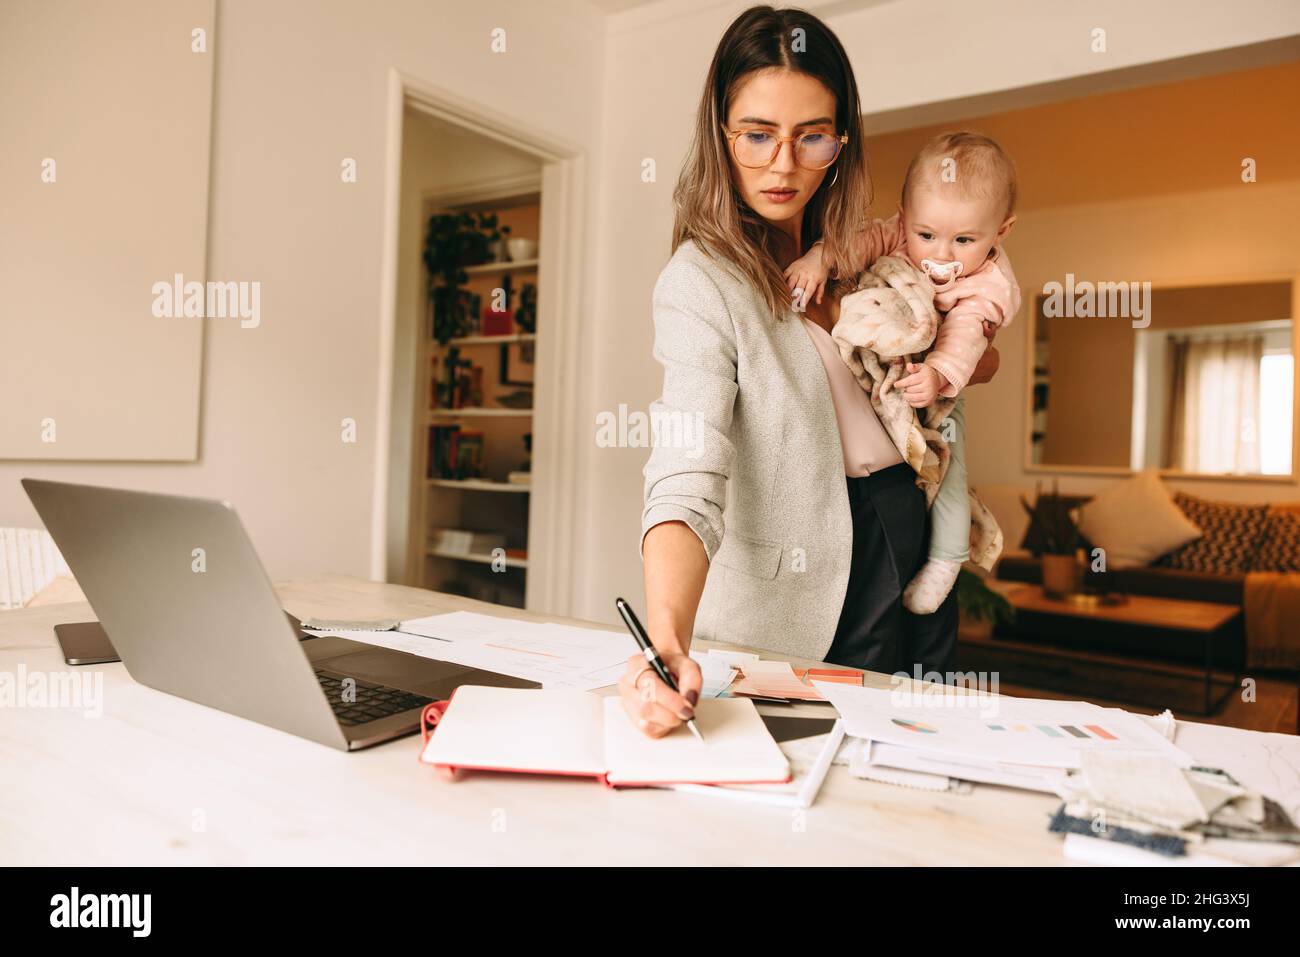 Female interior designer making notes while holding her baby. Multitasking mom planning a new project in her home office. Creative businesswoman balan Stock Photo